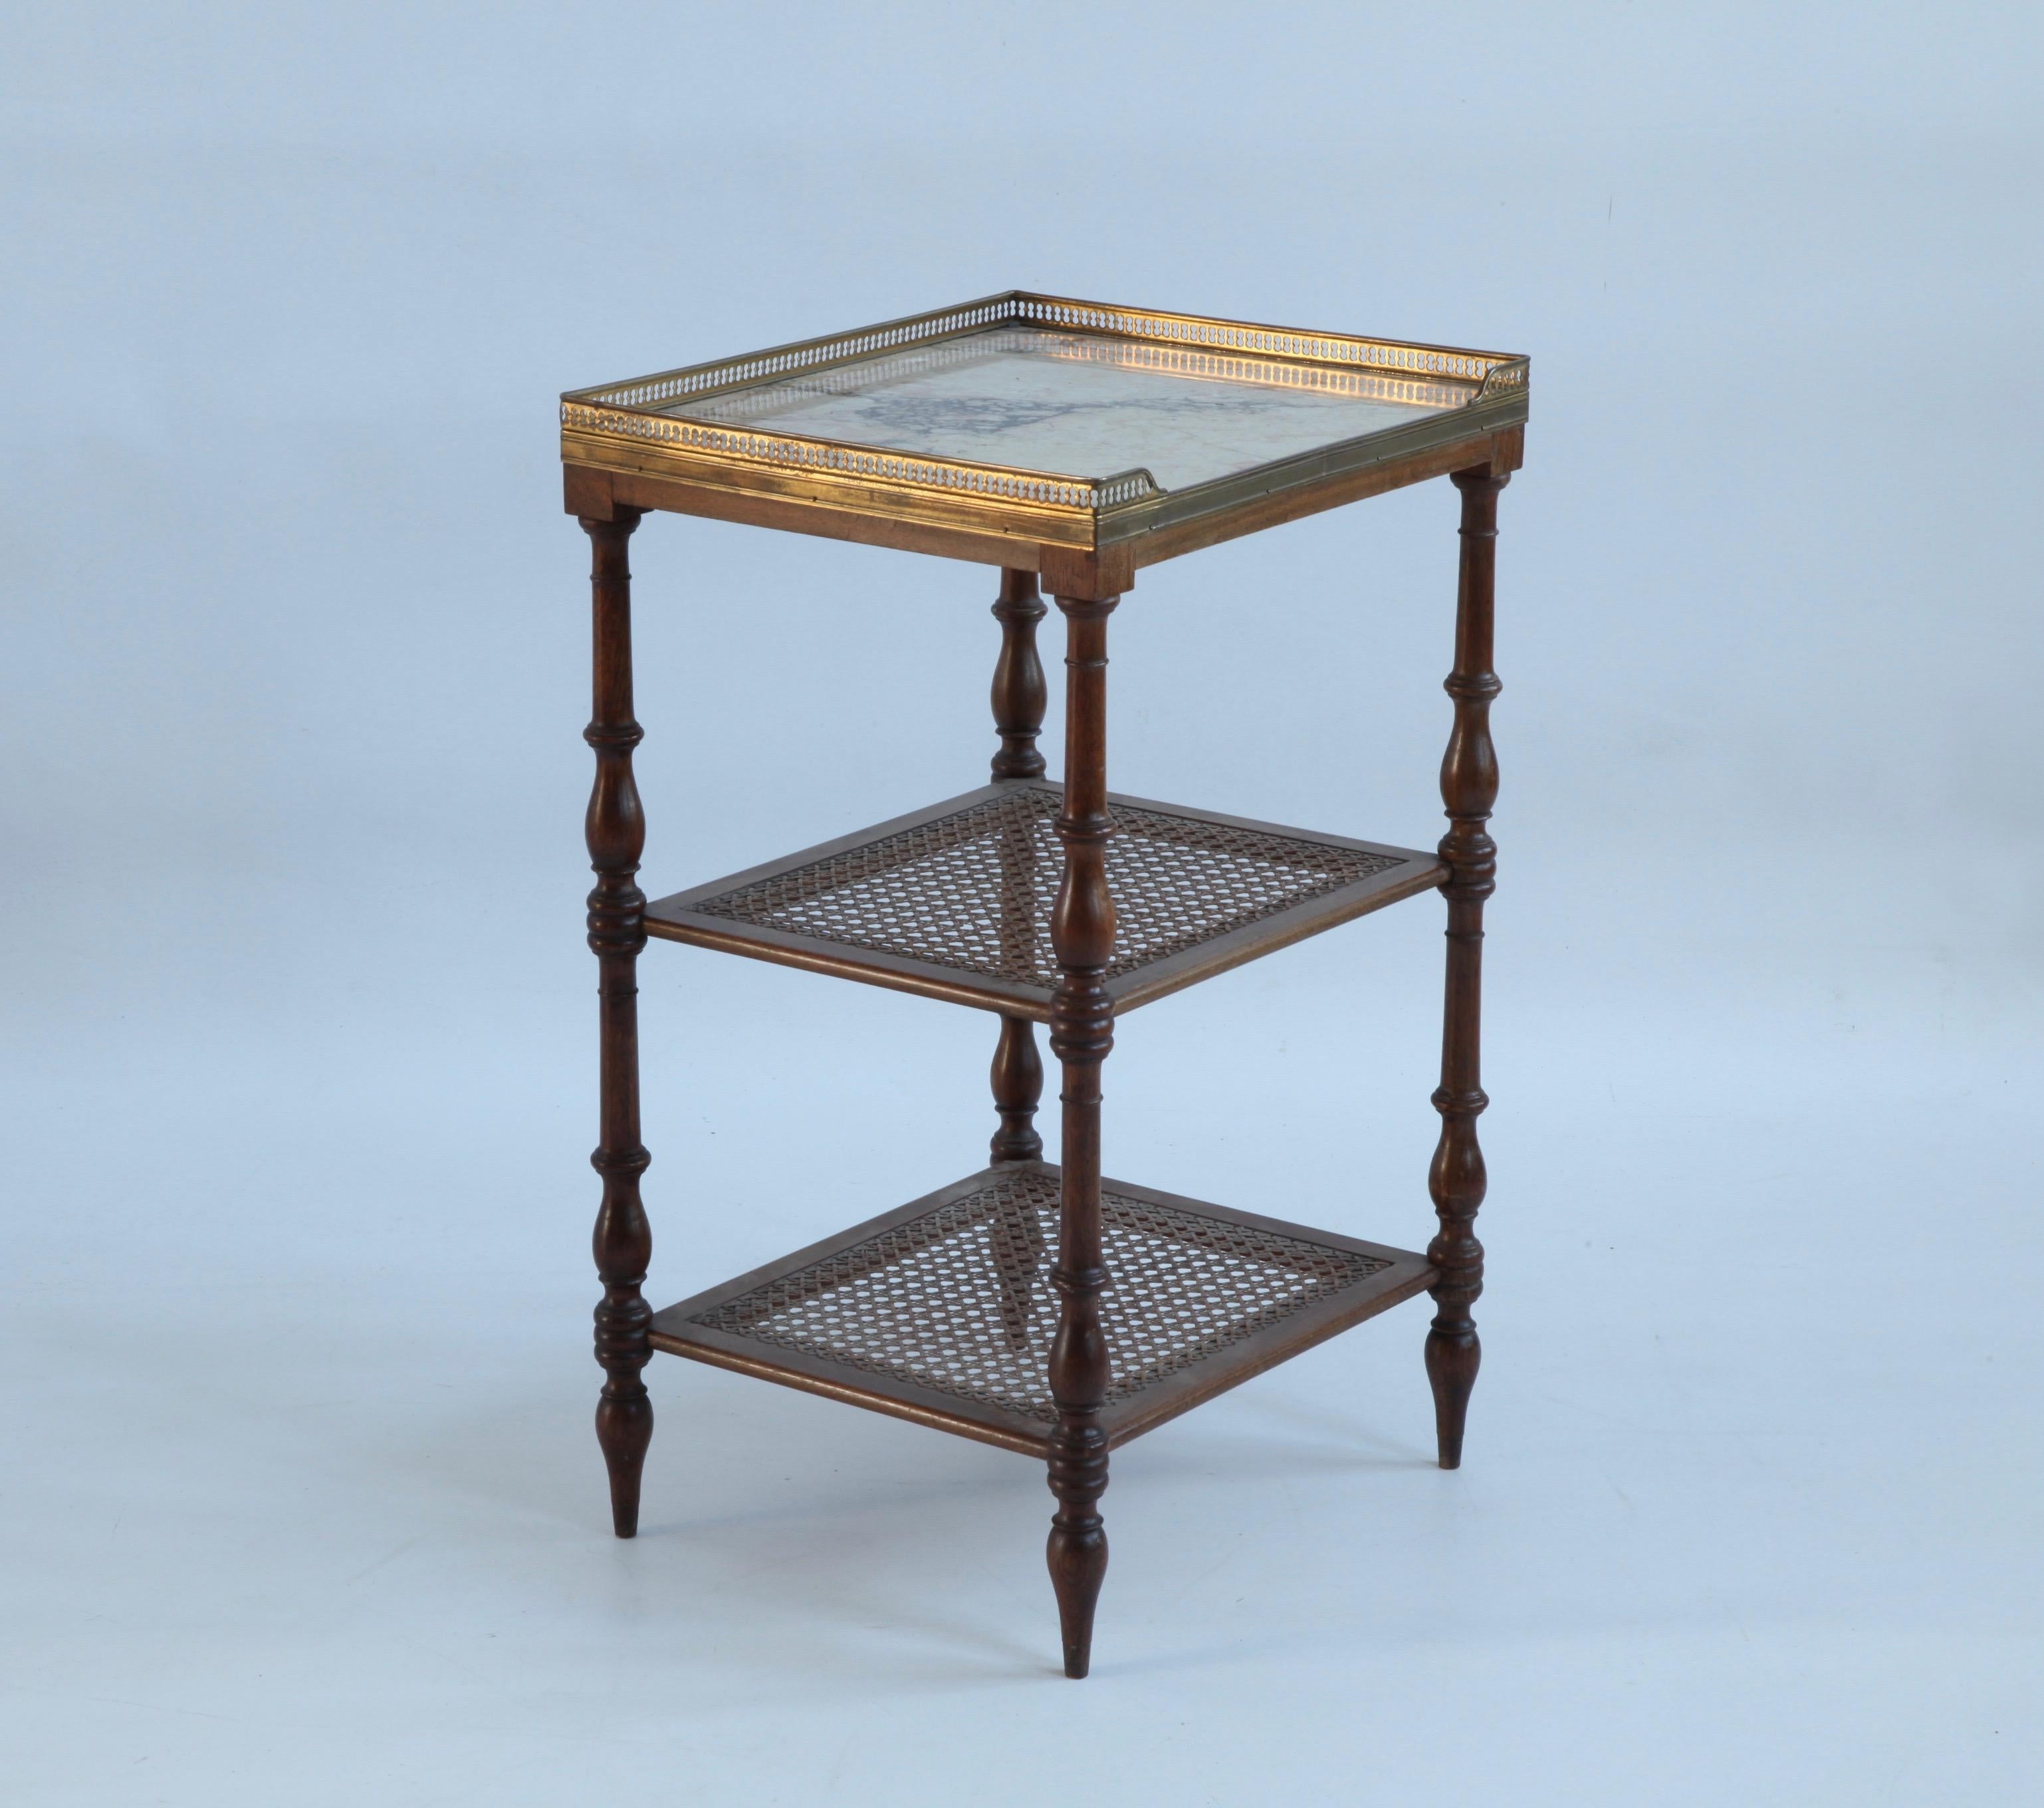 A French, freestanding shelving unit made at the turn of the 20th century in walnut with turned legs, a marble top trimmed with delicate brass fretwork and two wicker shelves. Neat and beautifully made.